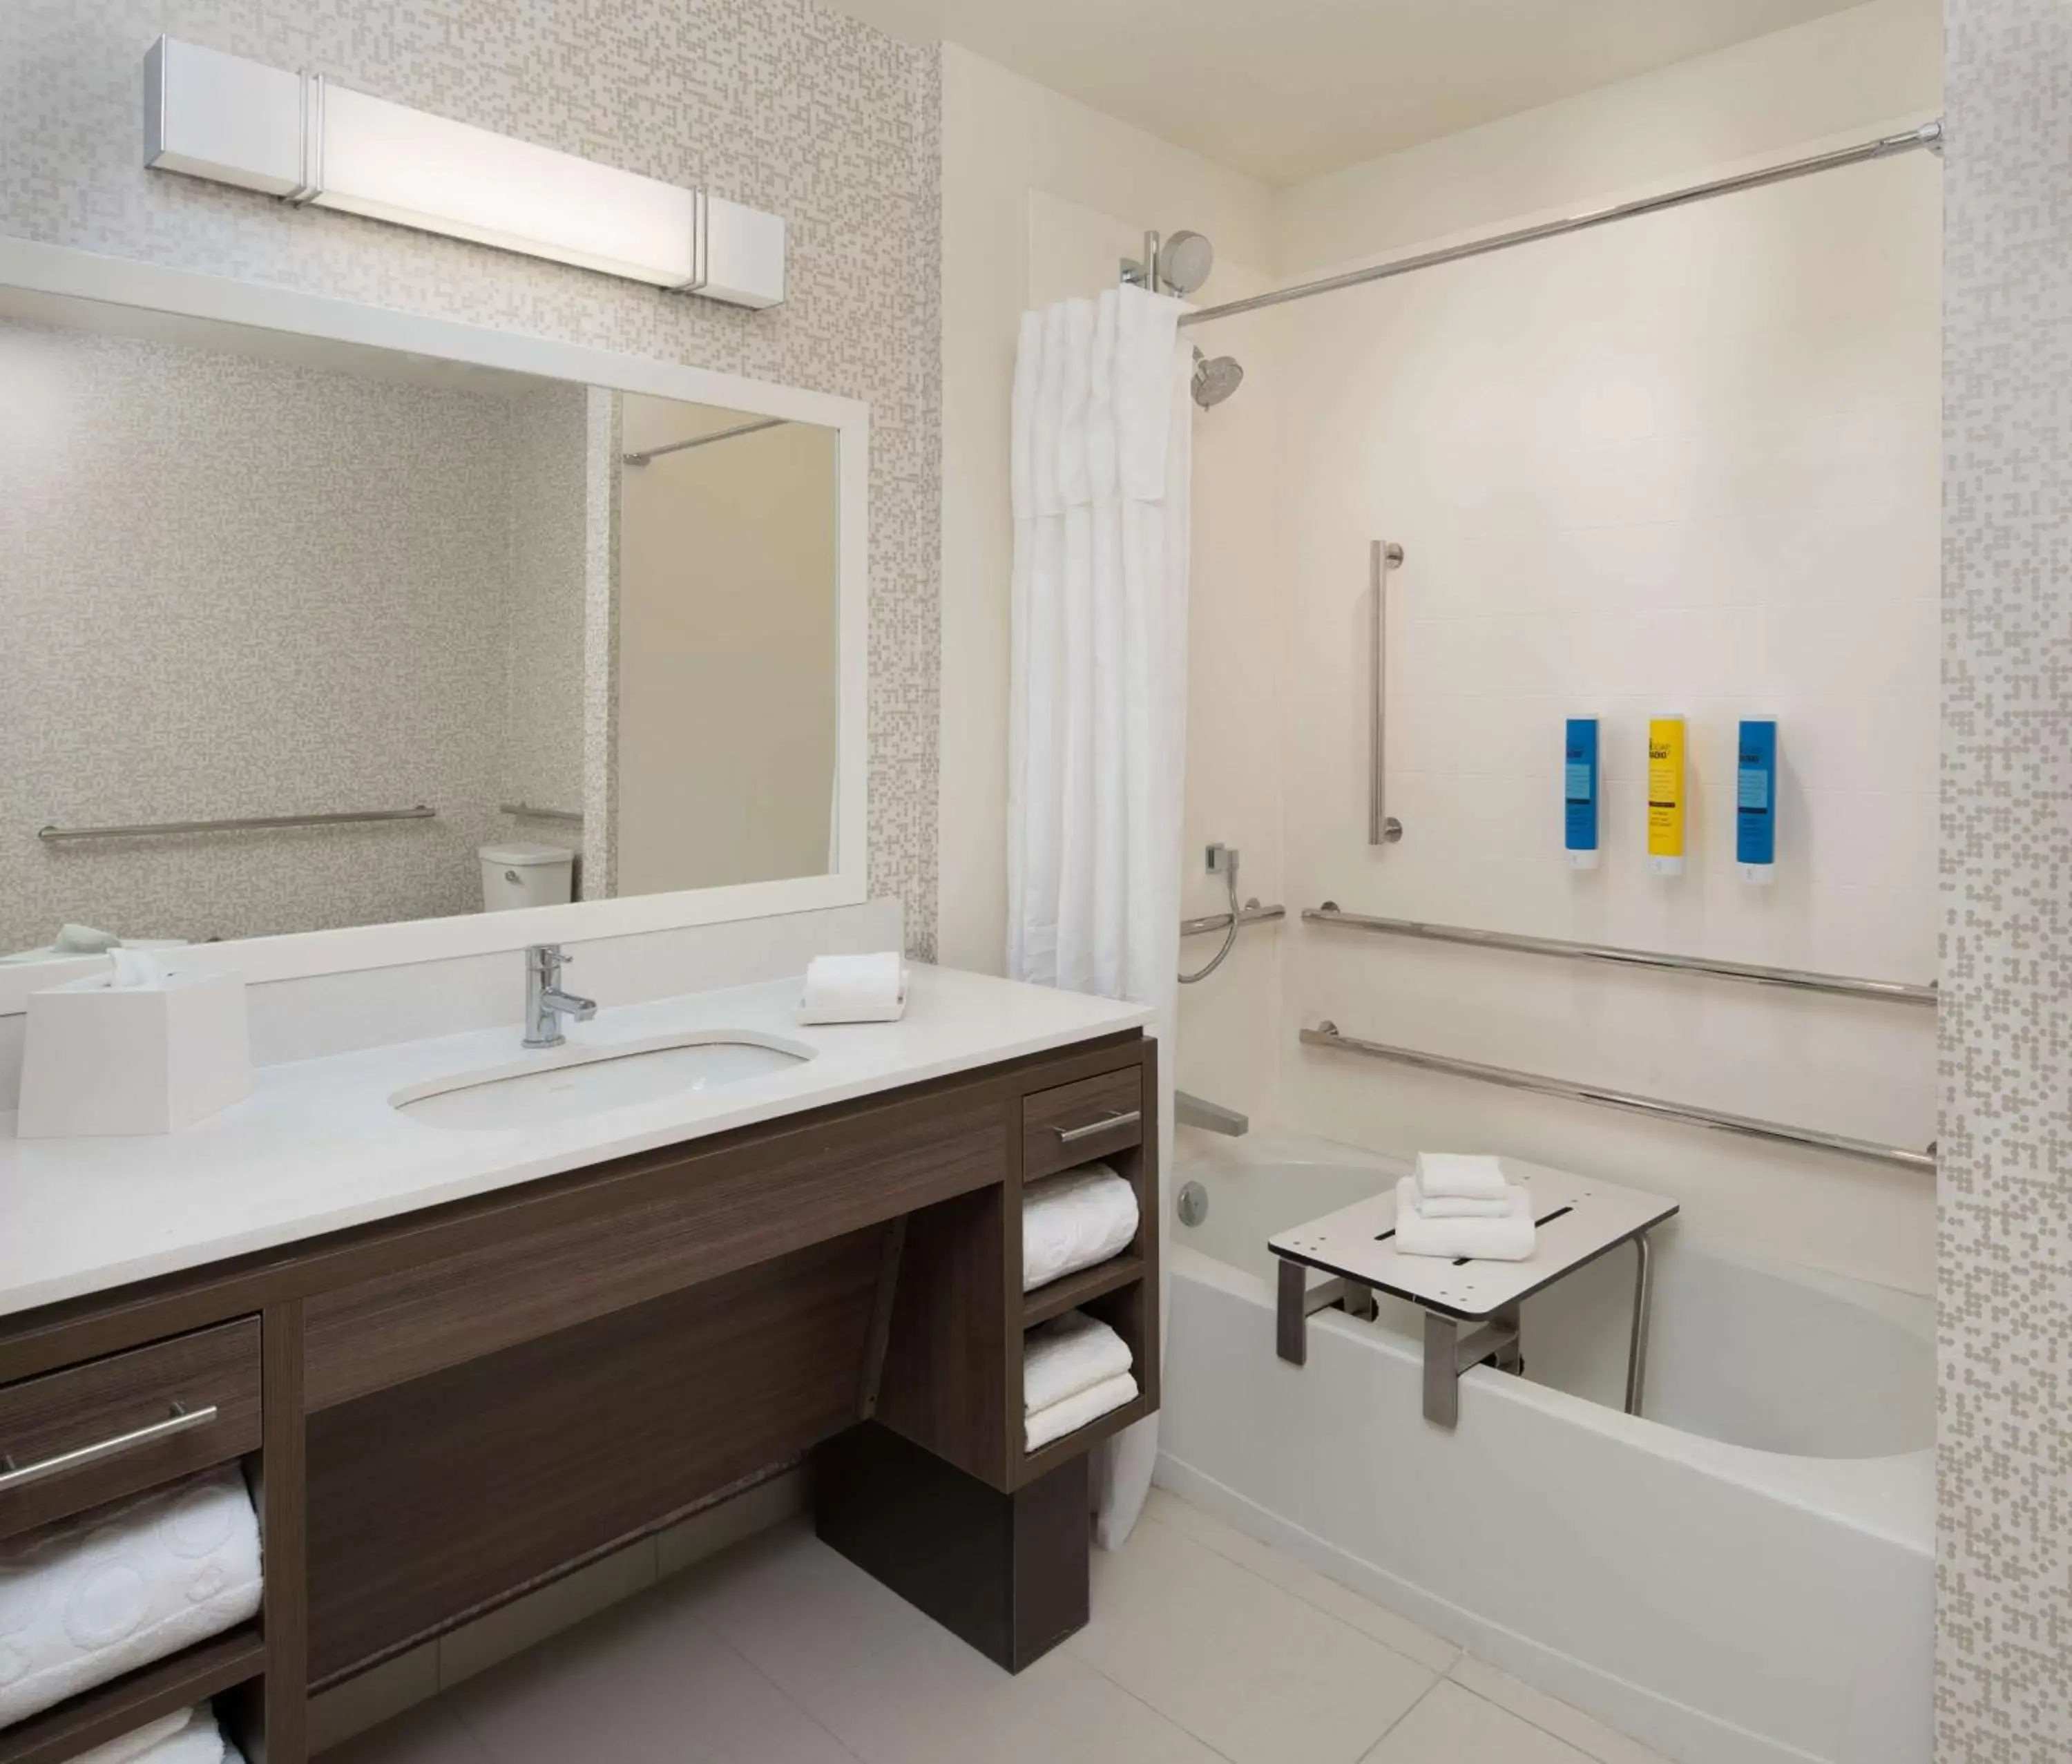 Bathroom in Home2 Suites By Hilton Ft. Lauderdale Downtown, Fl